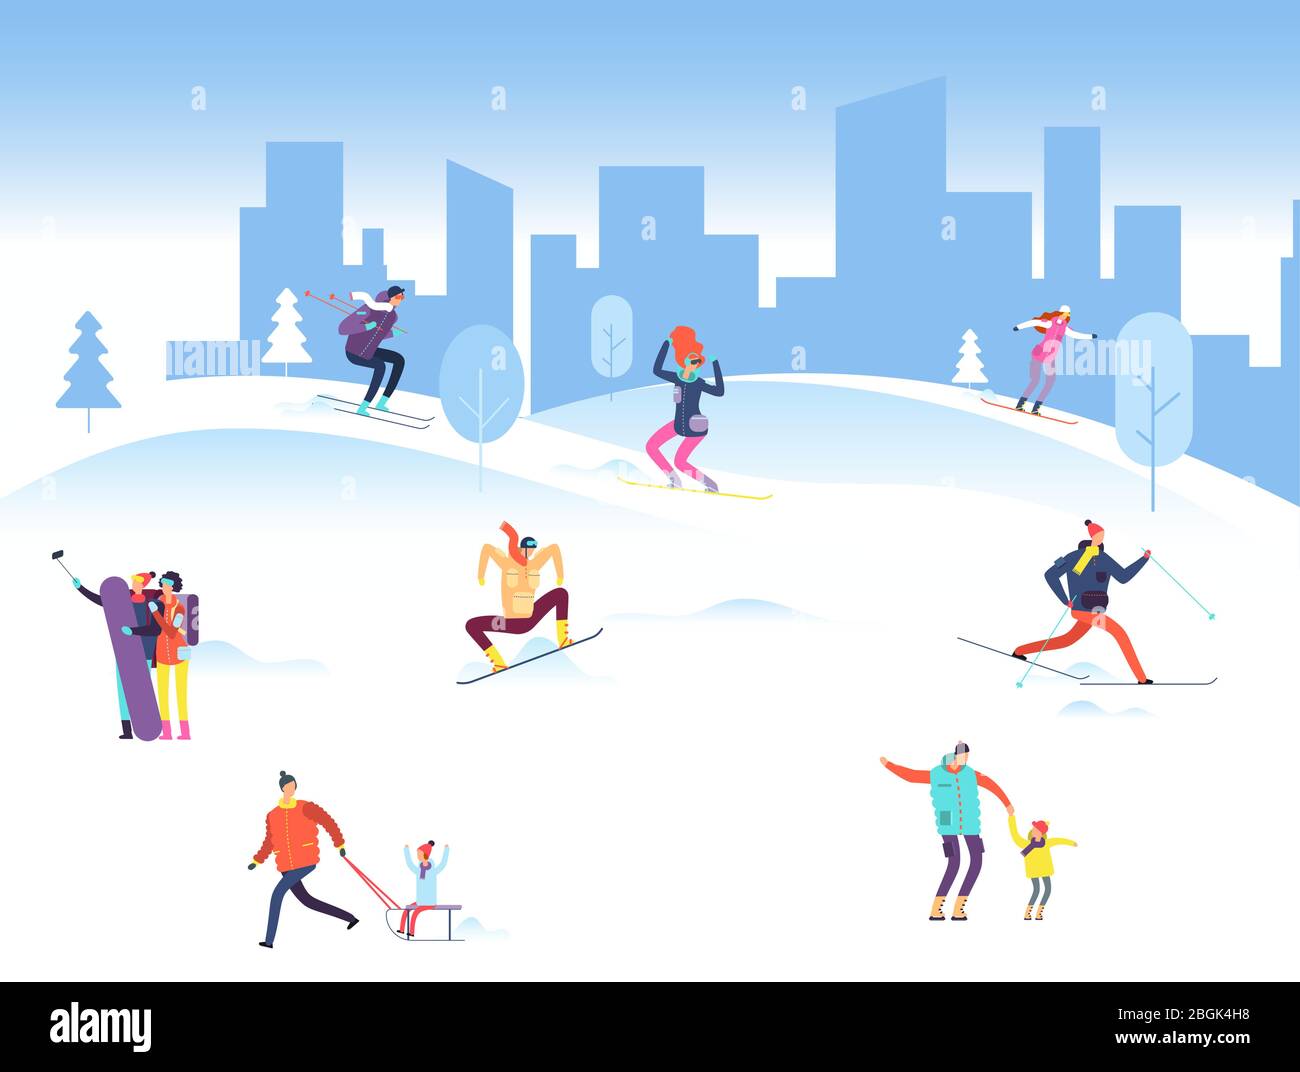 Merry christmas background with people in winter park. Family, adult and kids snowboarding and skiing outdoor. Vector illustration. Ski snow people, mountain snowboarding Stock Vector